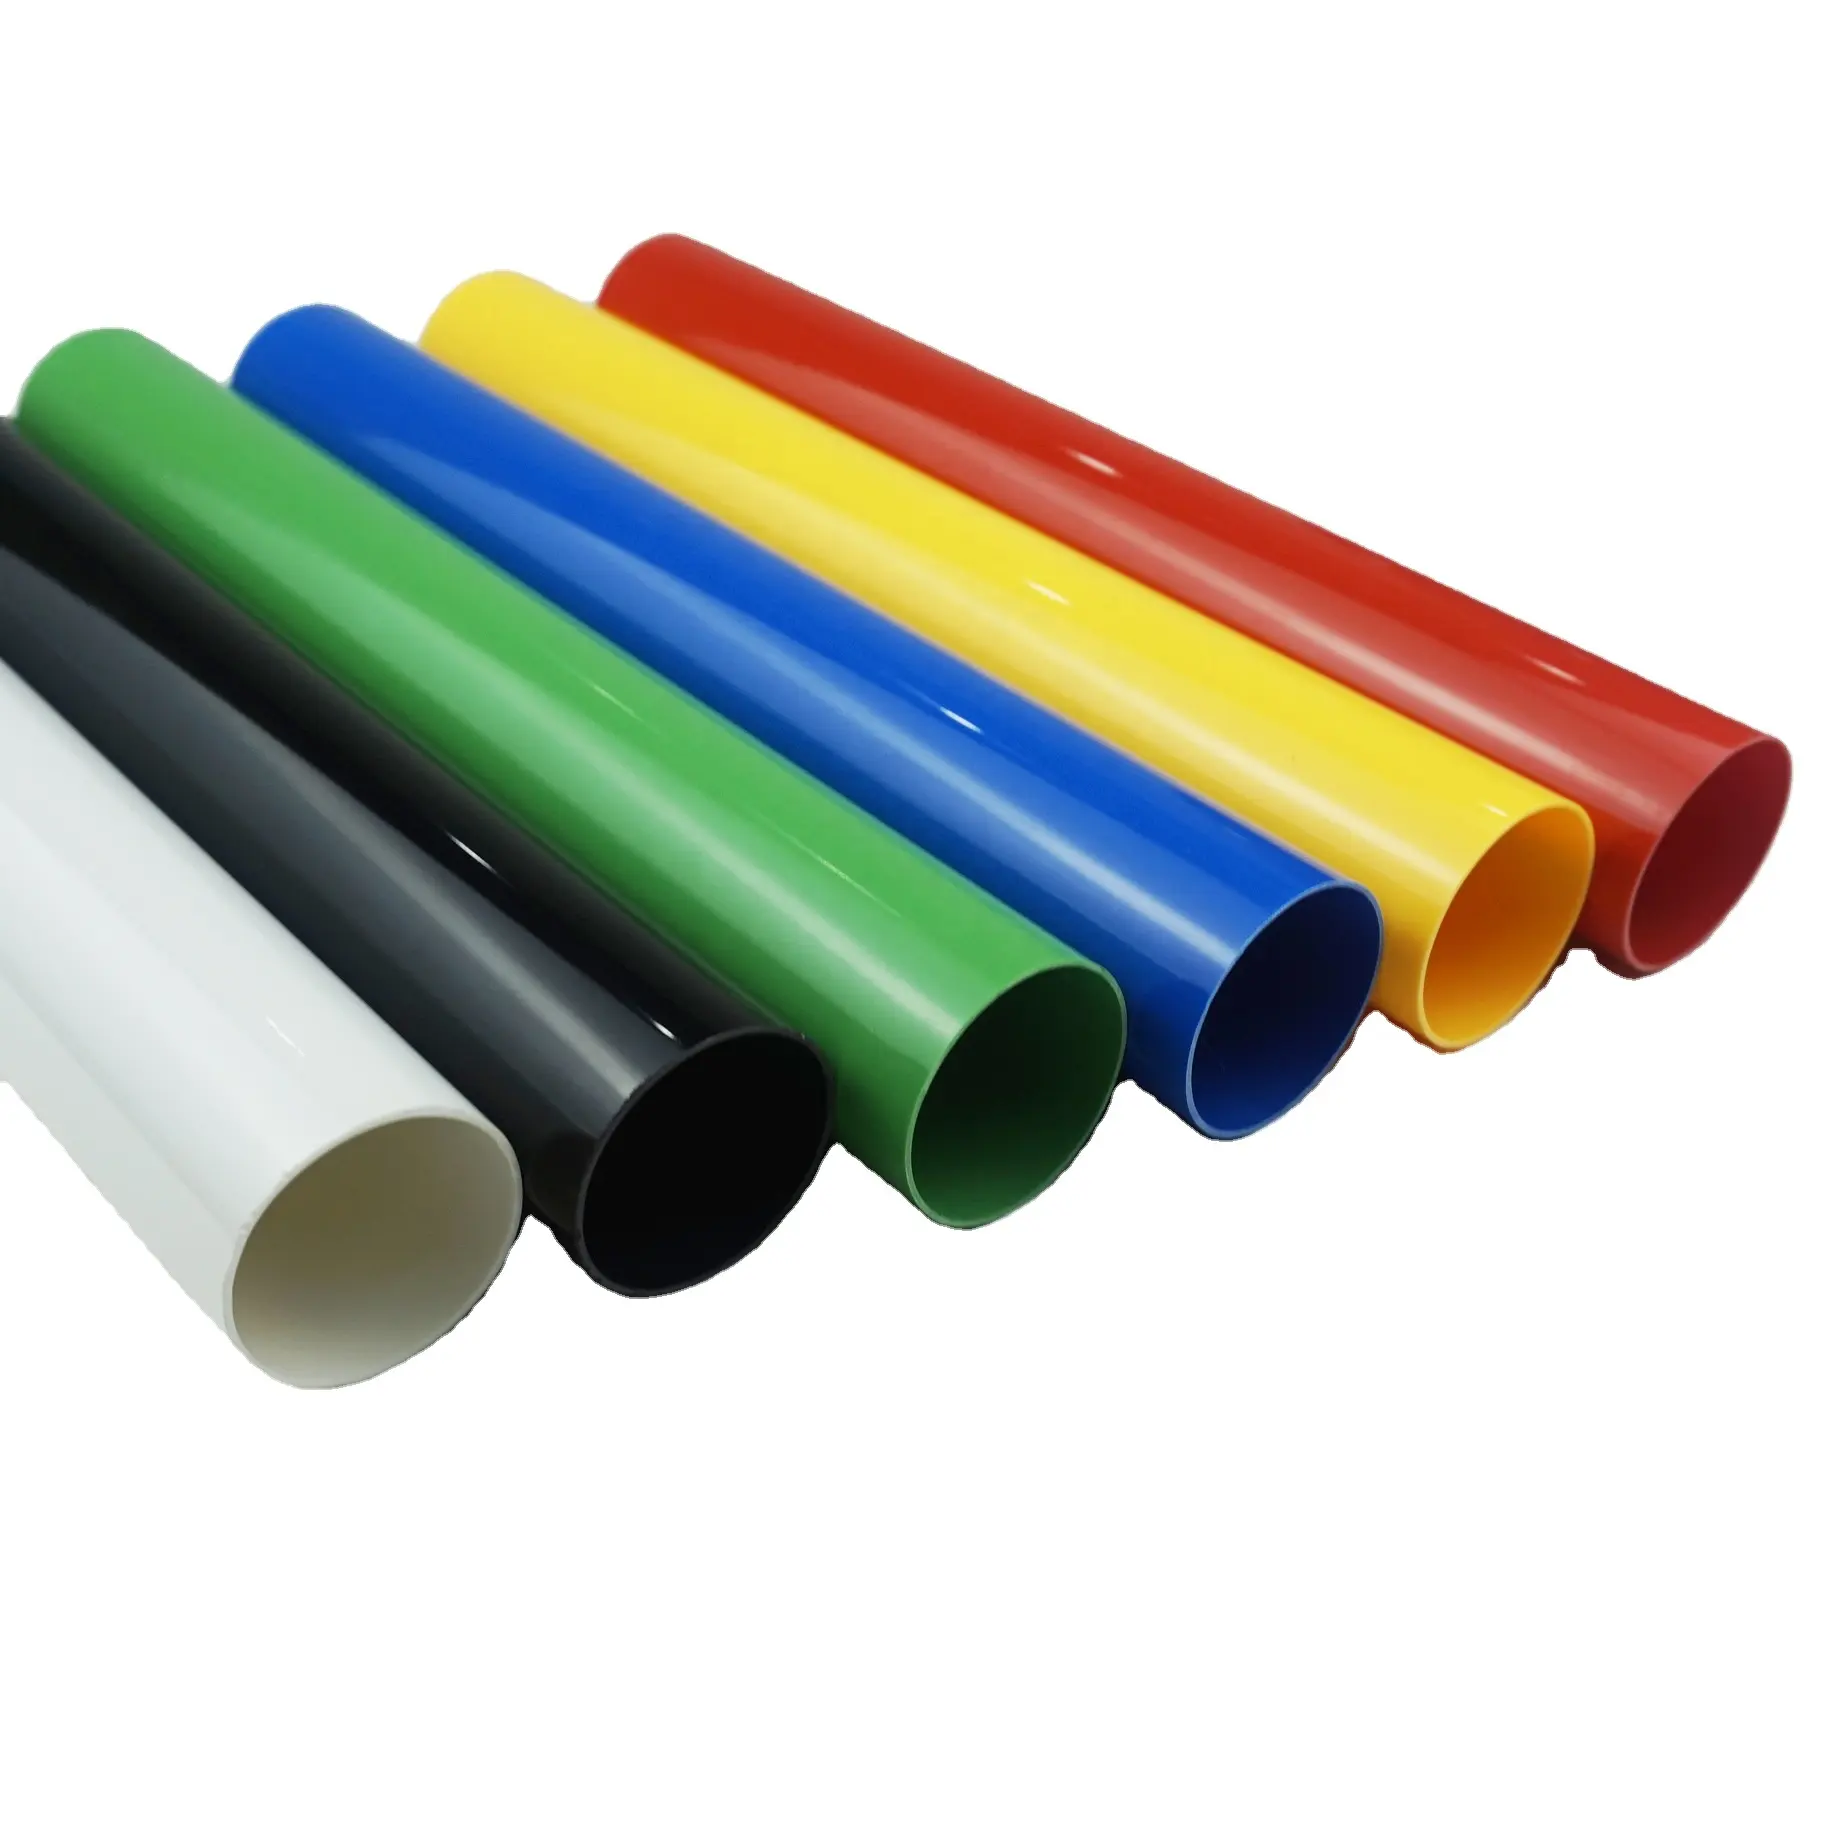 YQ furniture grade PvC Pipe colored PVC square tube water plastic pipes tube Extruded exhaust pipe ABS PVC PC PP PPSU PET PMMA